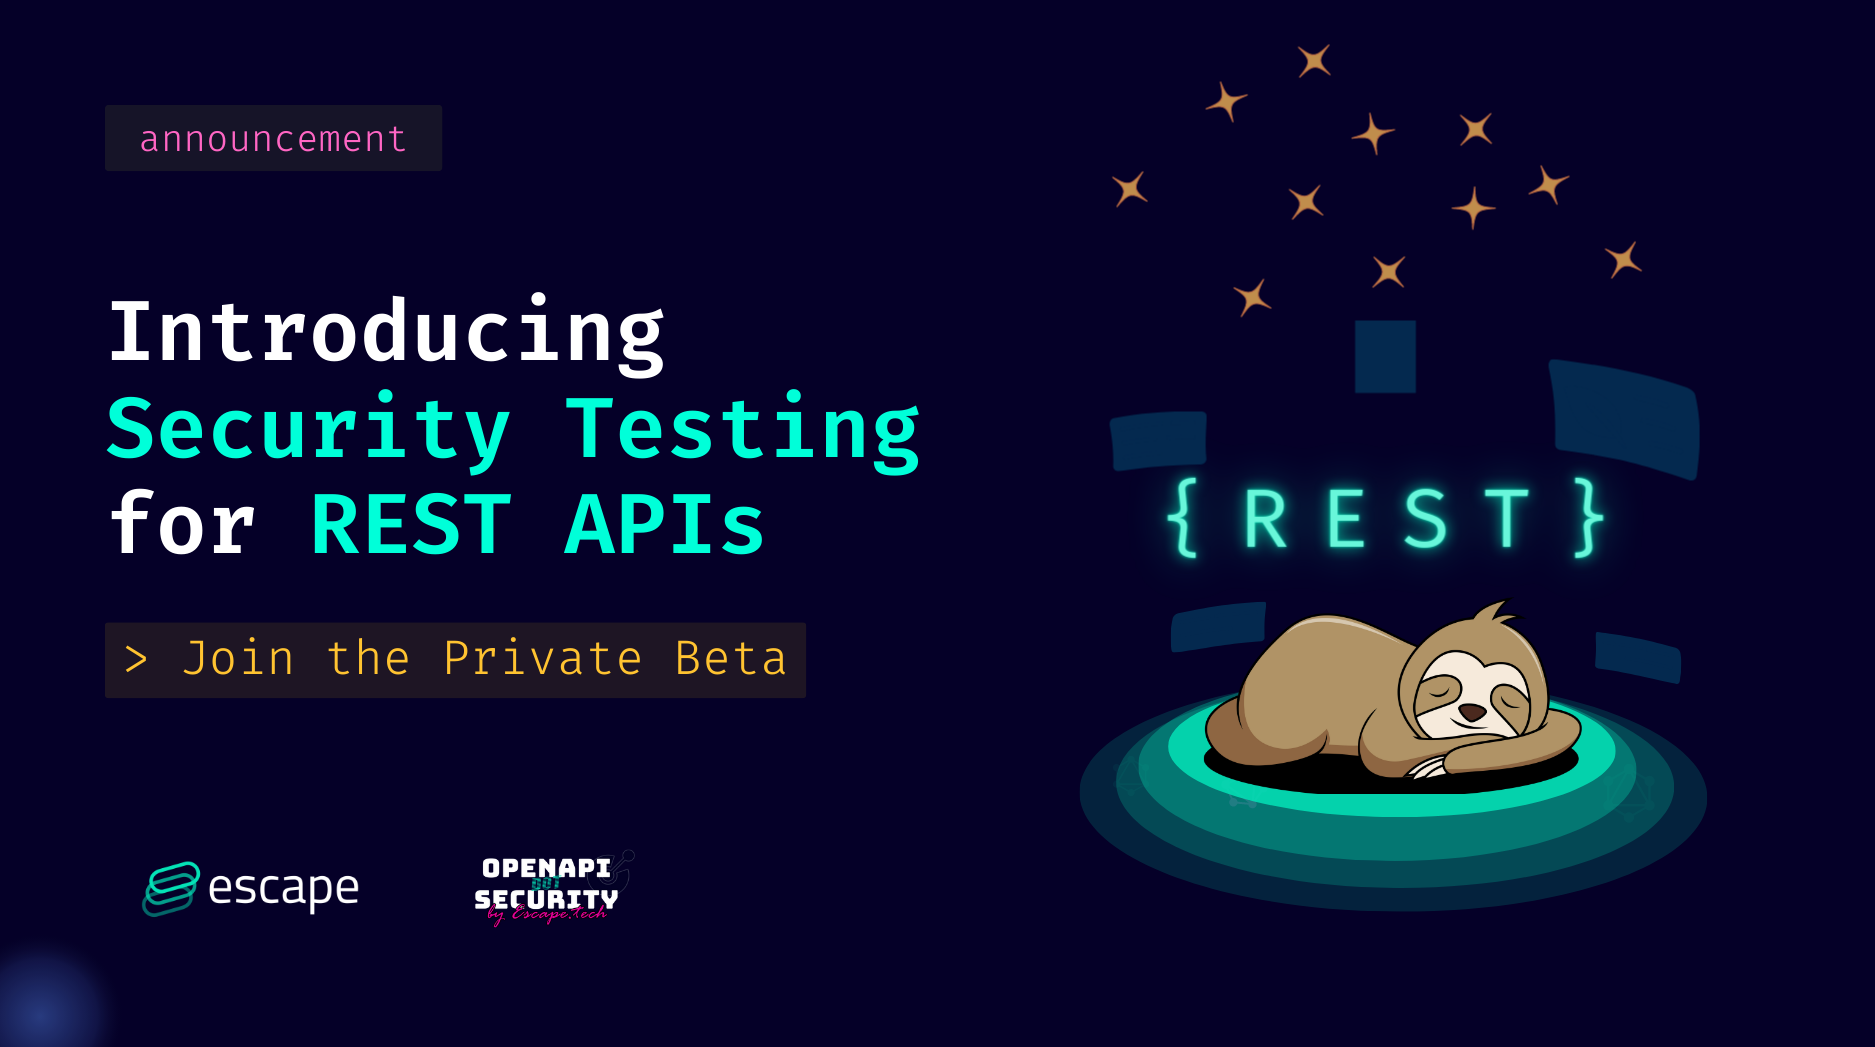 Introducing business logic security testing for REST APIs